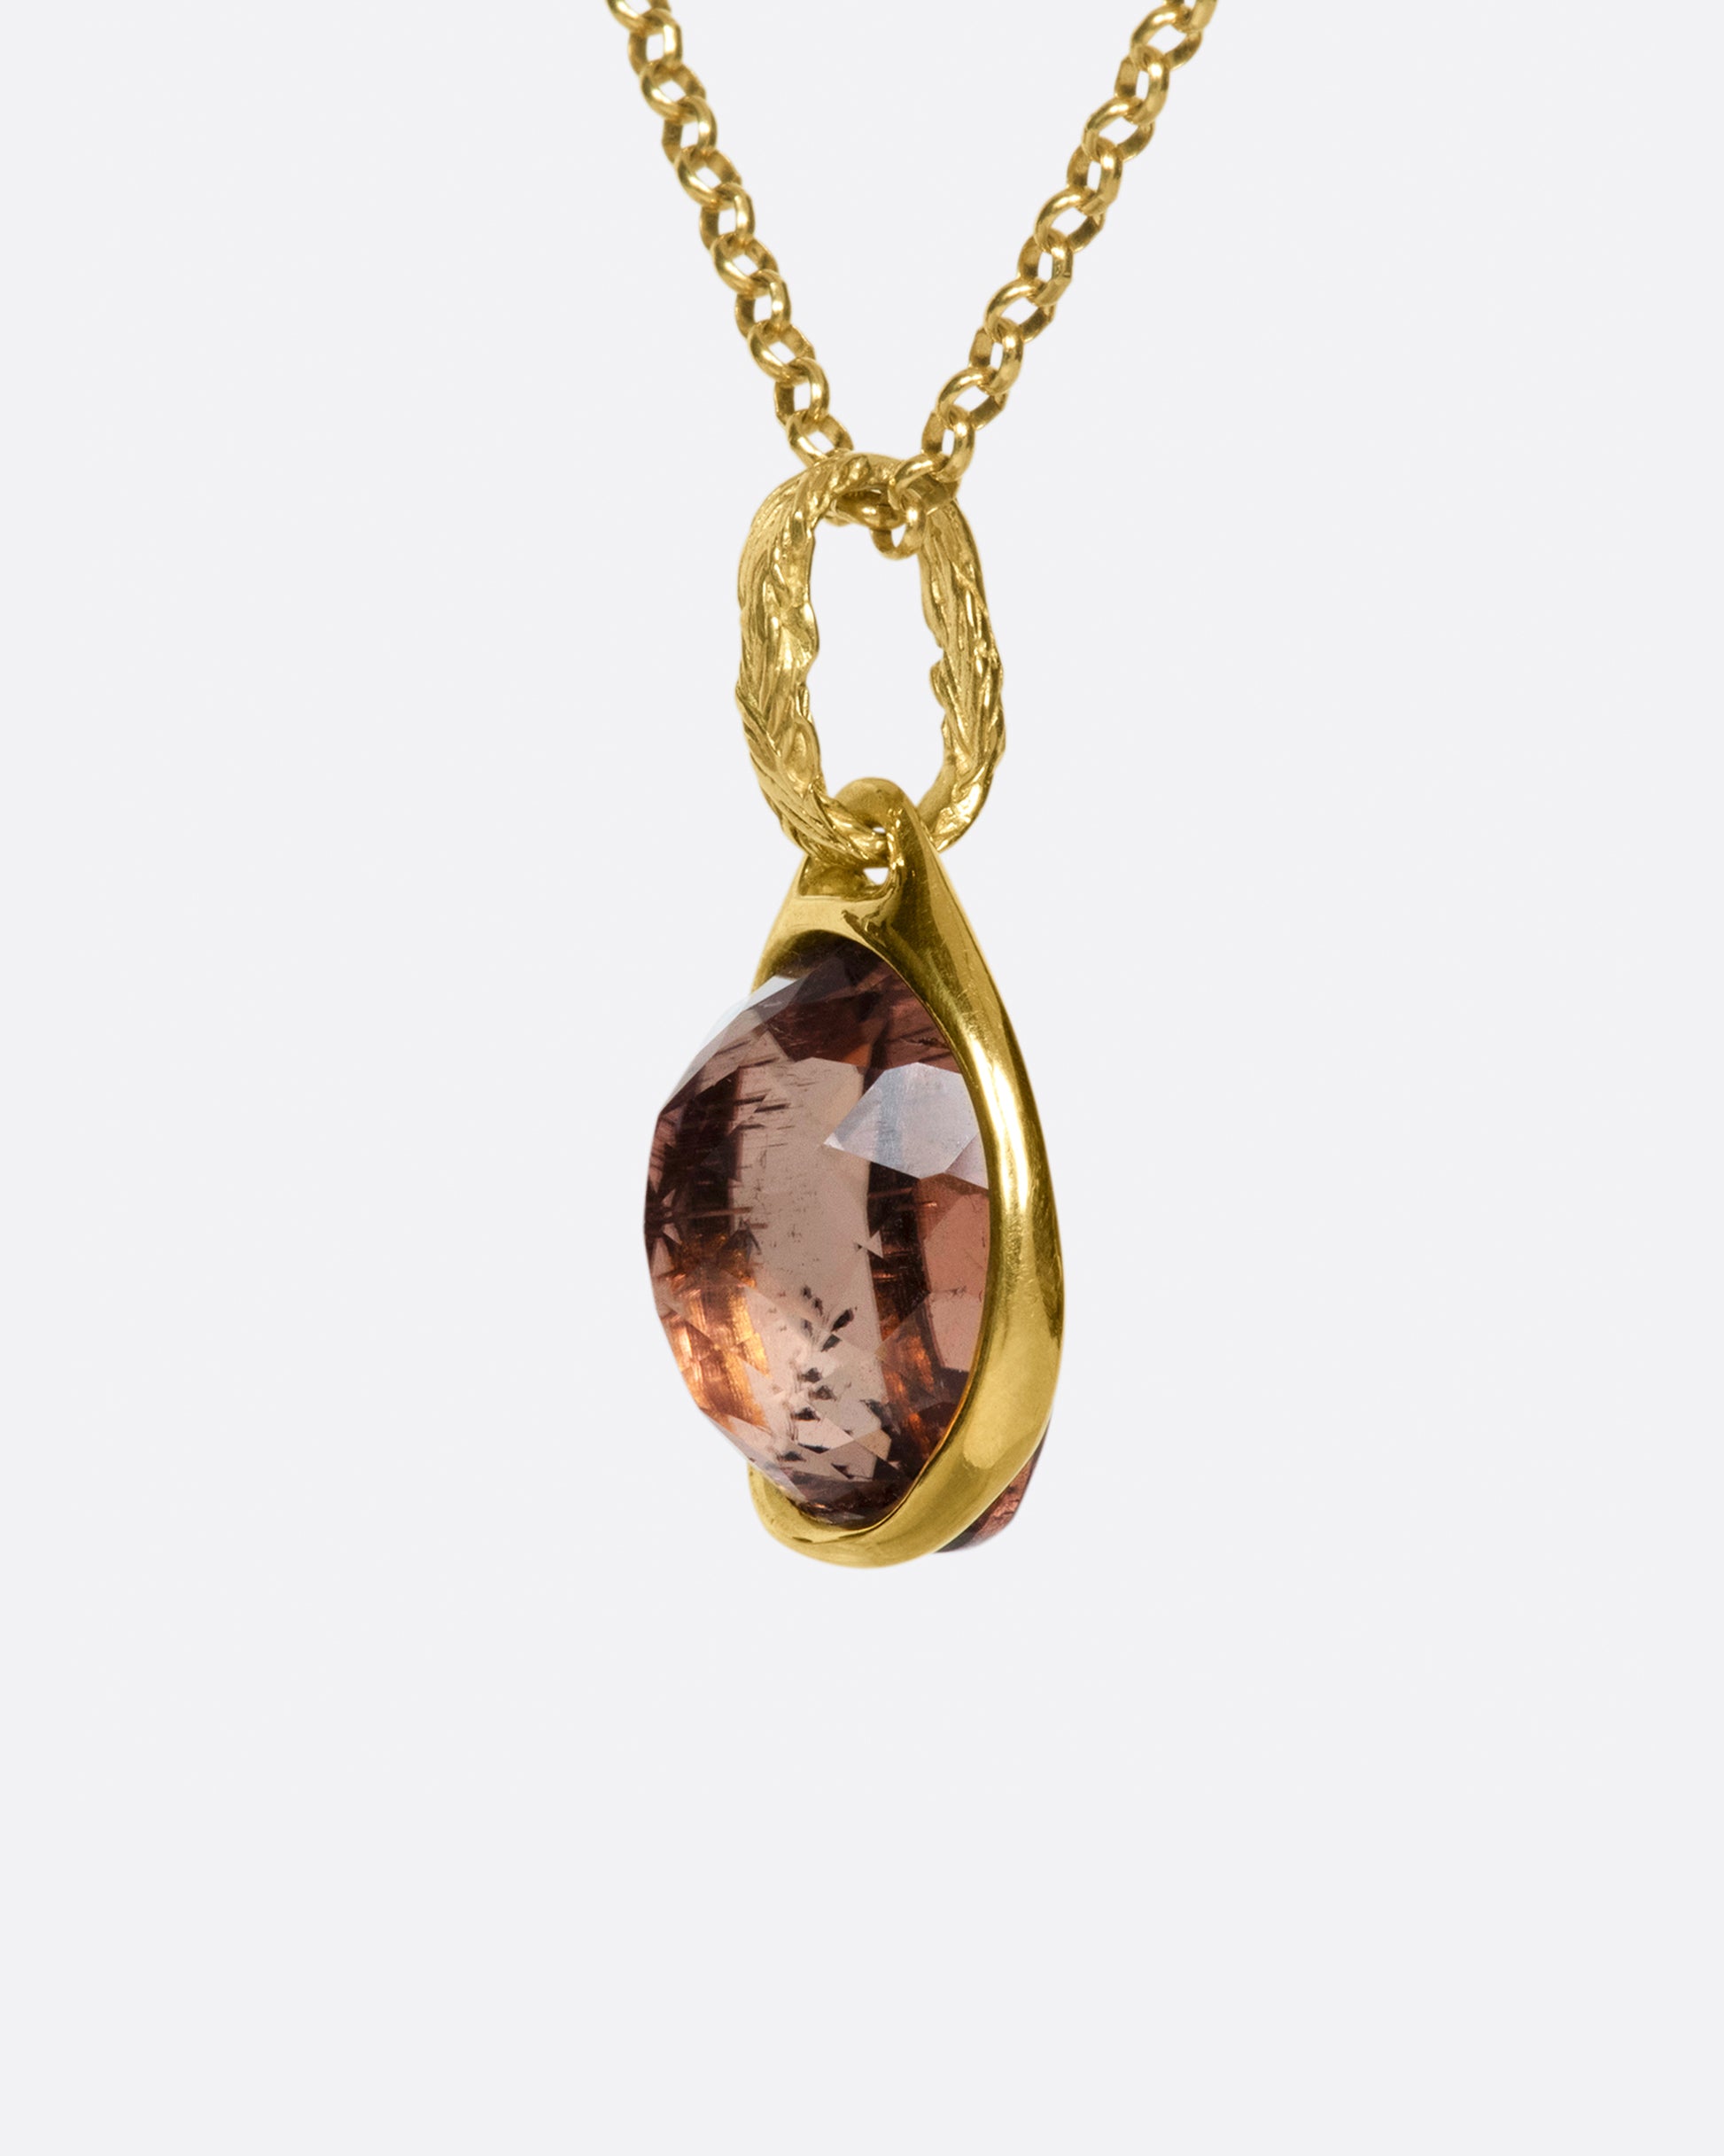 A faceted, pink tourmaline pendant that can be worn facing either way to celebrate the glory of the stone.